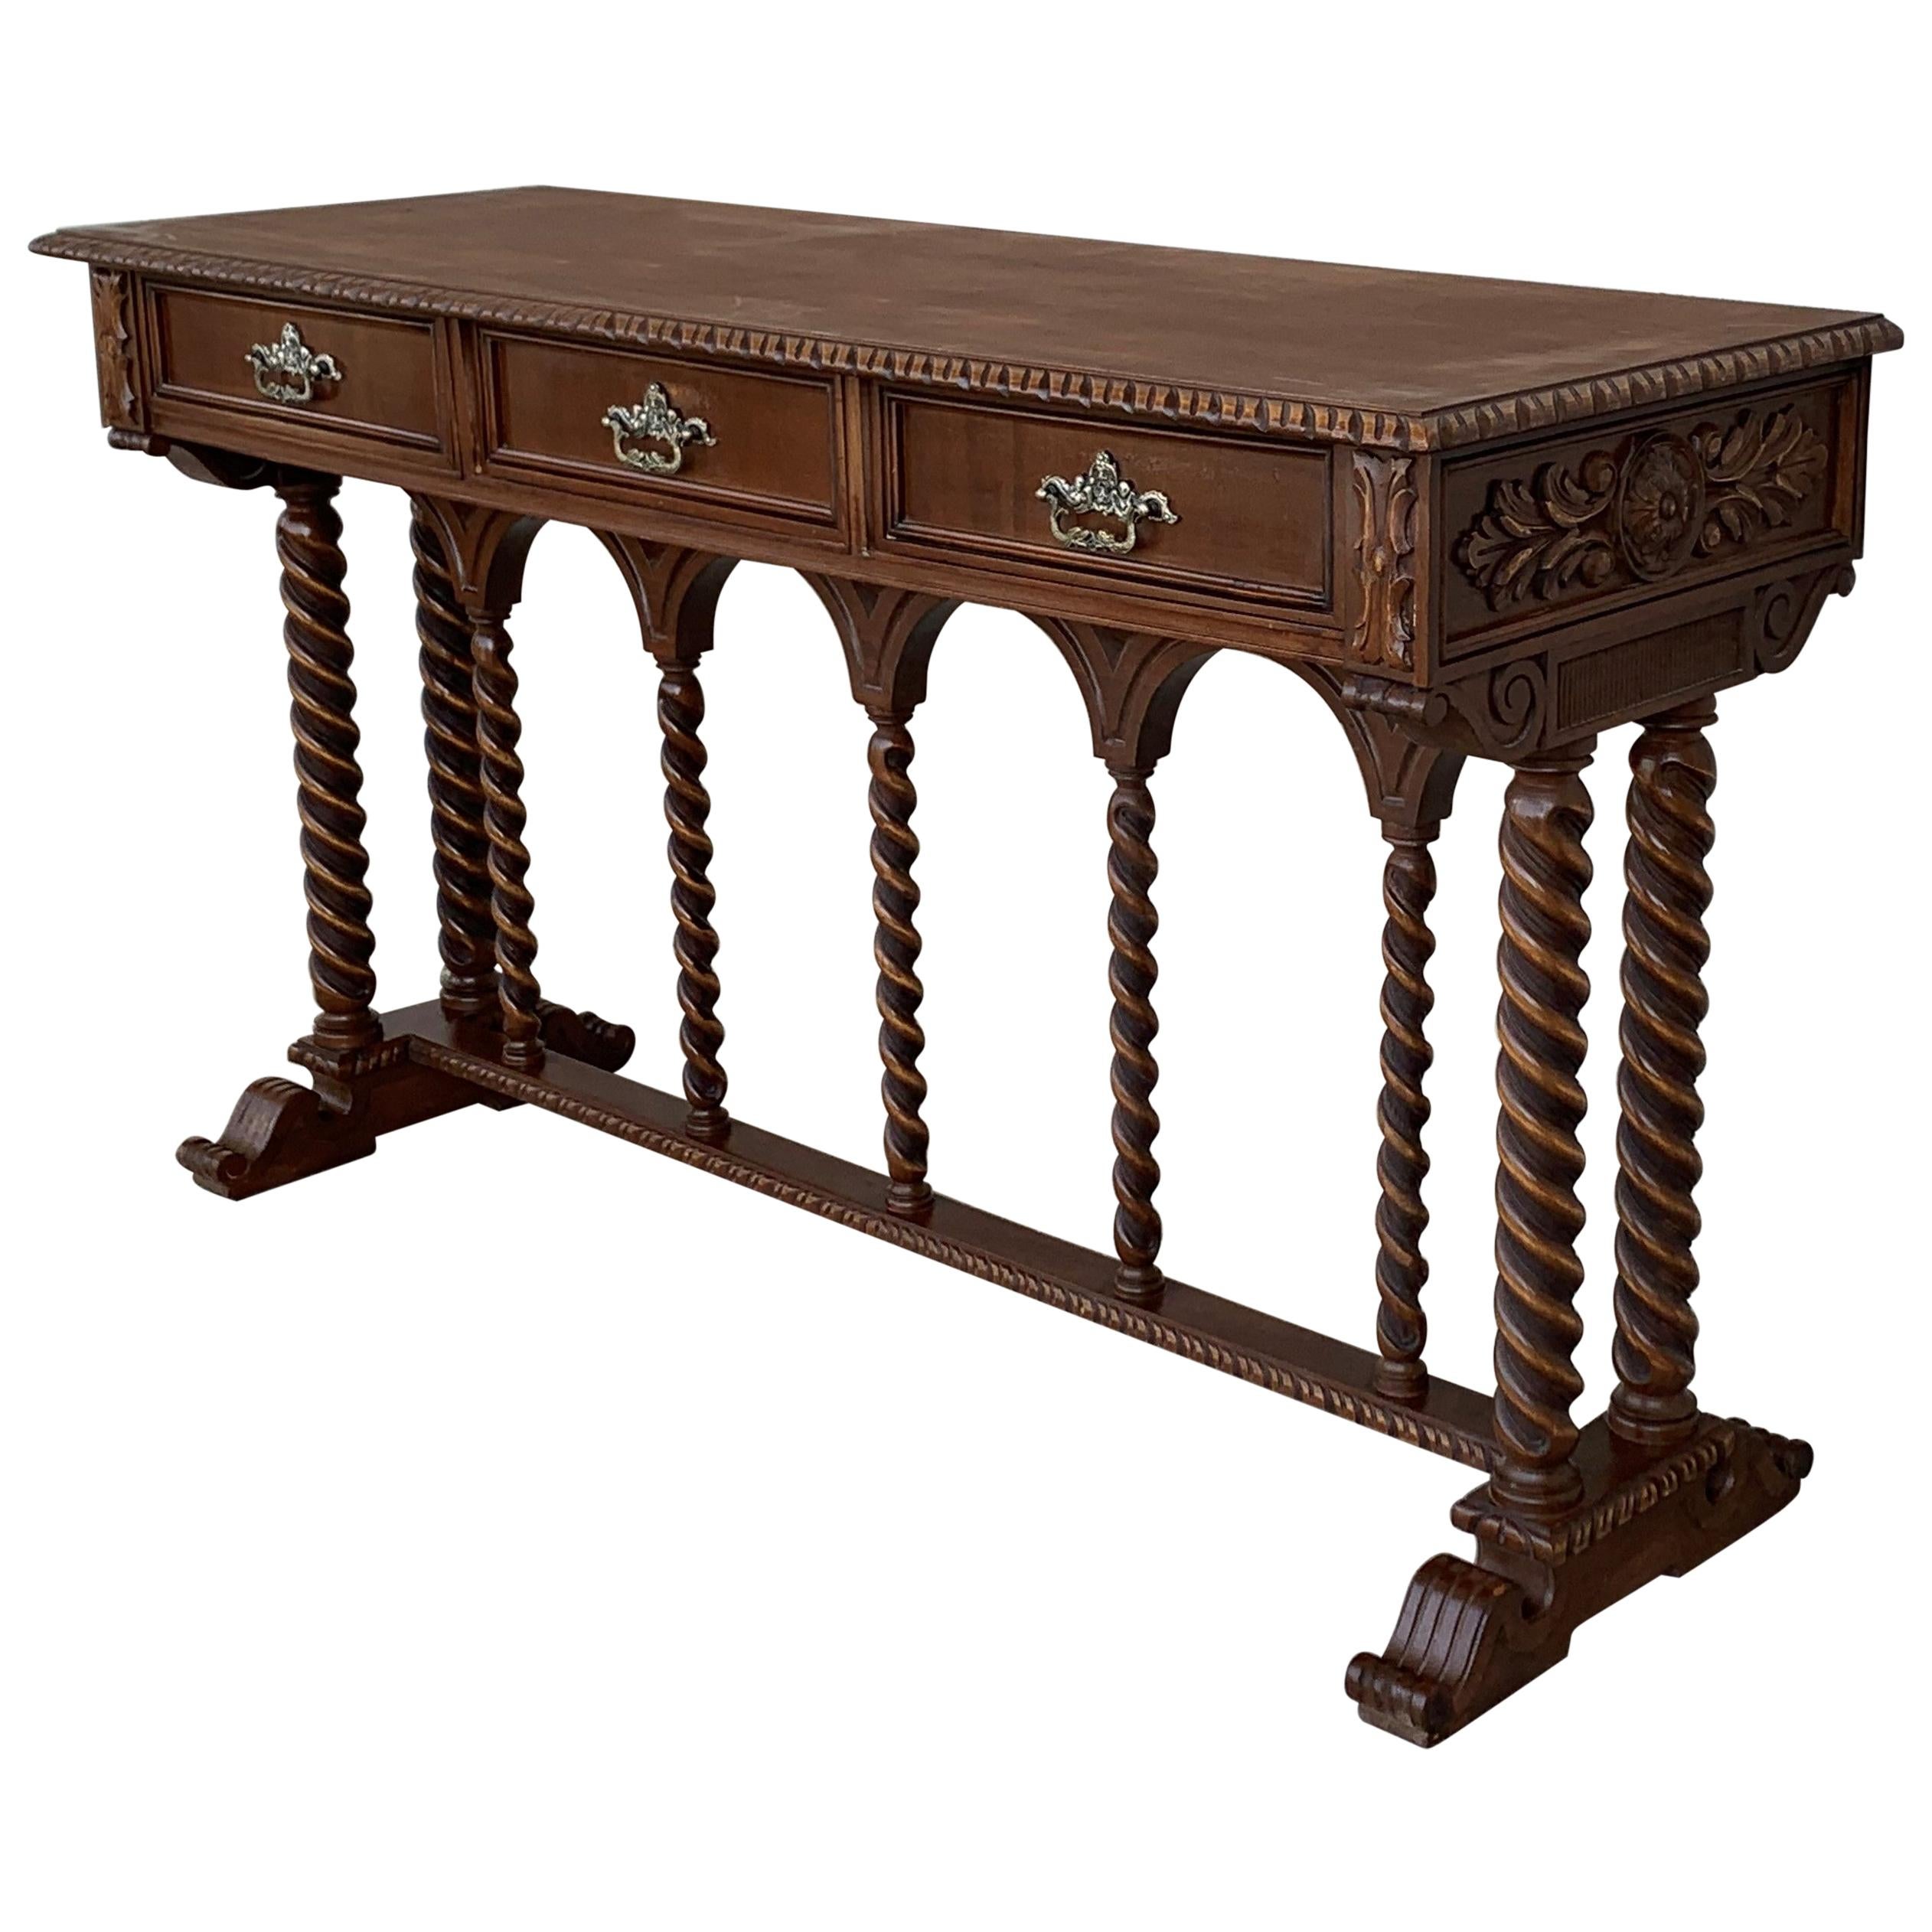 Spanish Tuscan Console Table with Three Drawers and Solomonic Columns Legs